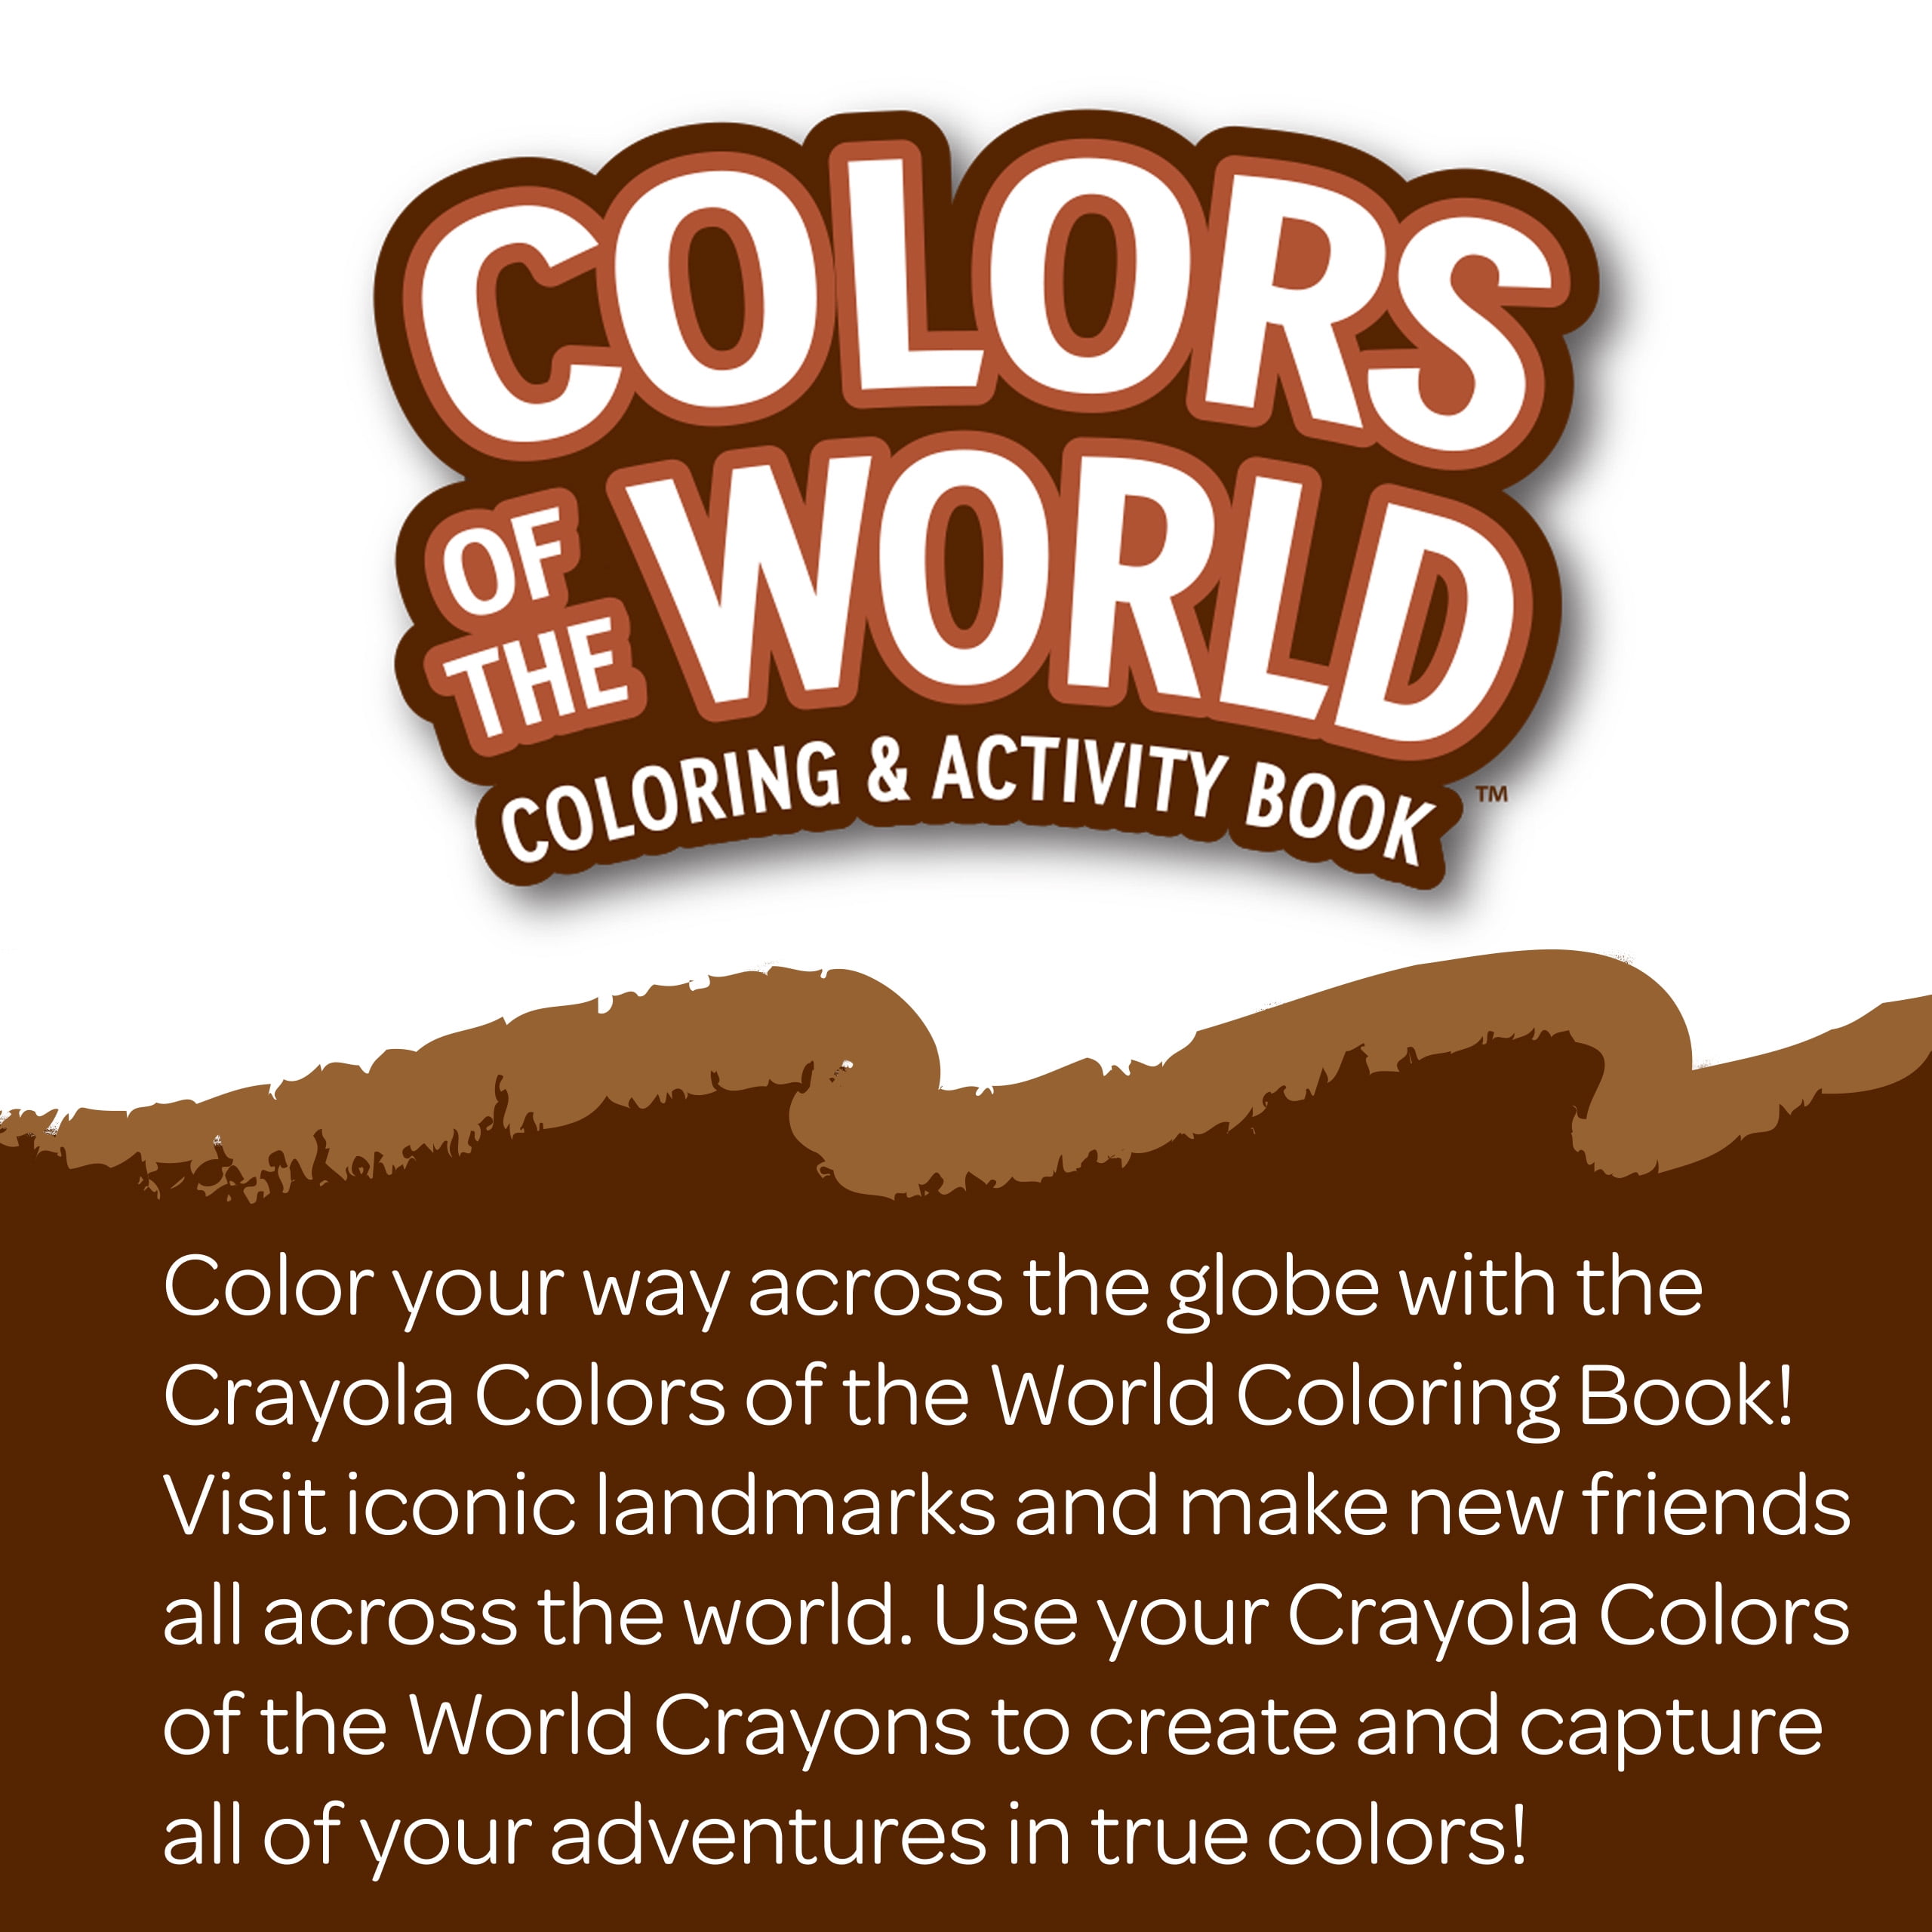 Explore the World of Color- Cool Coloring Books for Kids, cheap stuff under  1 dollar, Chinese and Ancient History Books - Classful